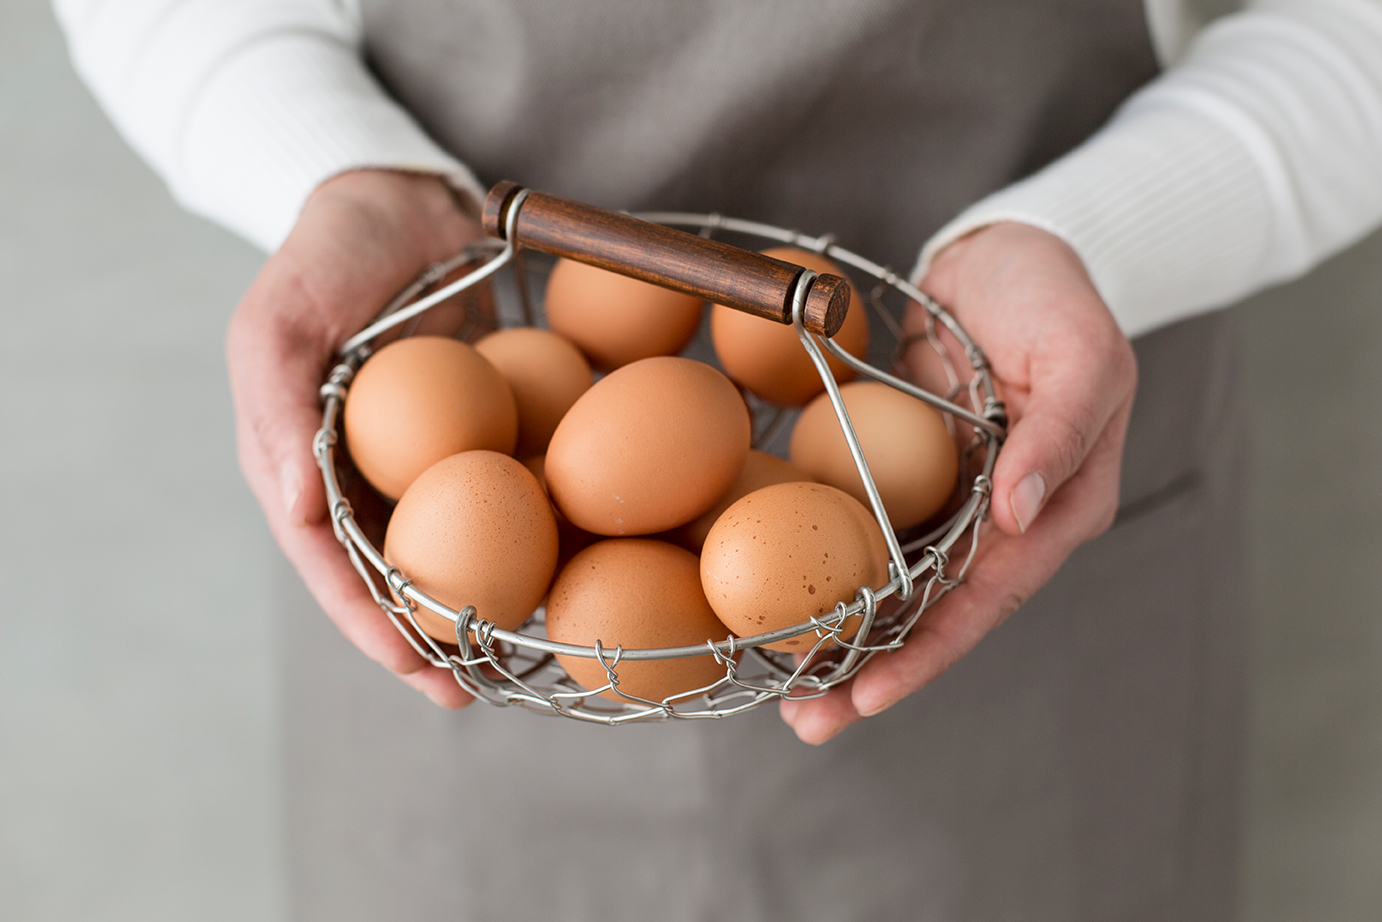 commercial food photographer - a chef holds a basket of fresh eggs